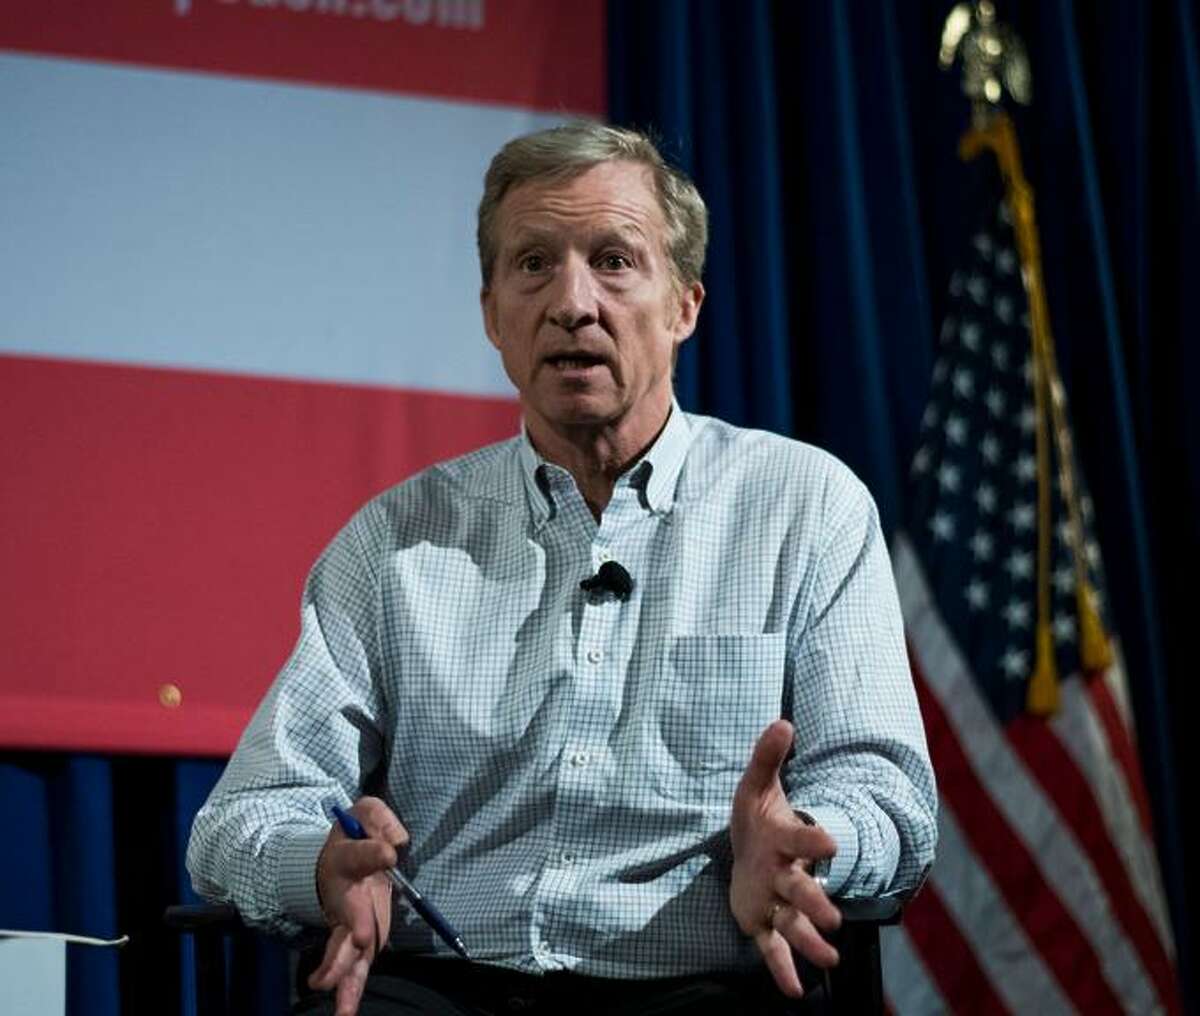 US environmental activist and Democrat Tom Steyer called out his fellow Democrats as well as Republicans for allowing America to be corrupted at the state Democratic Party convention.